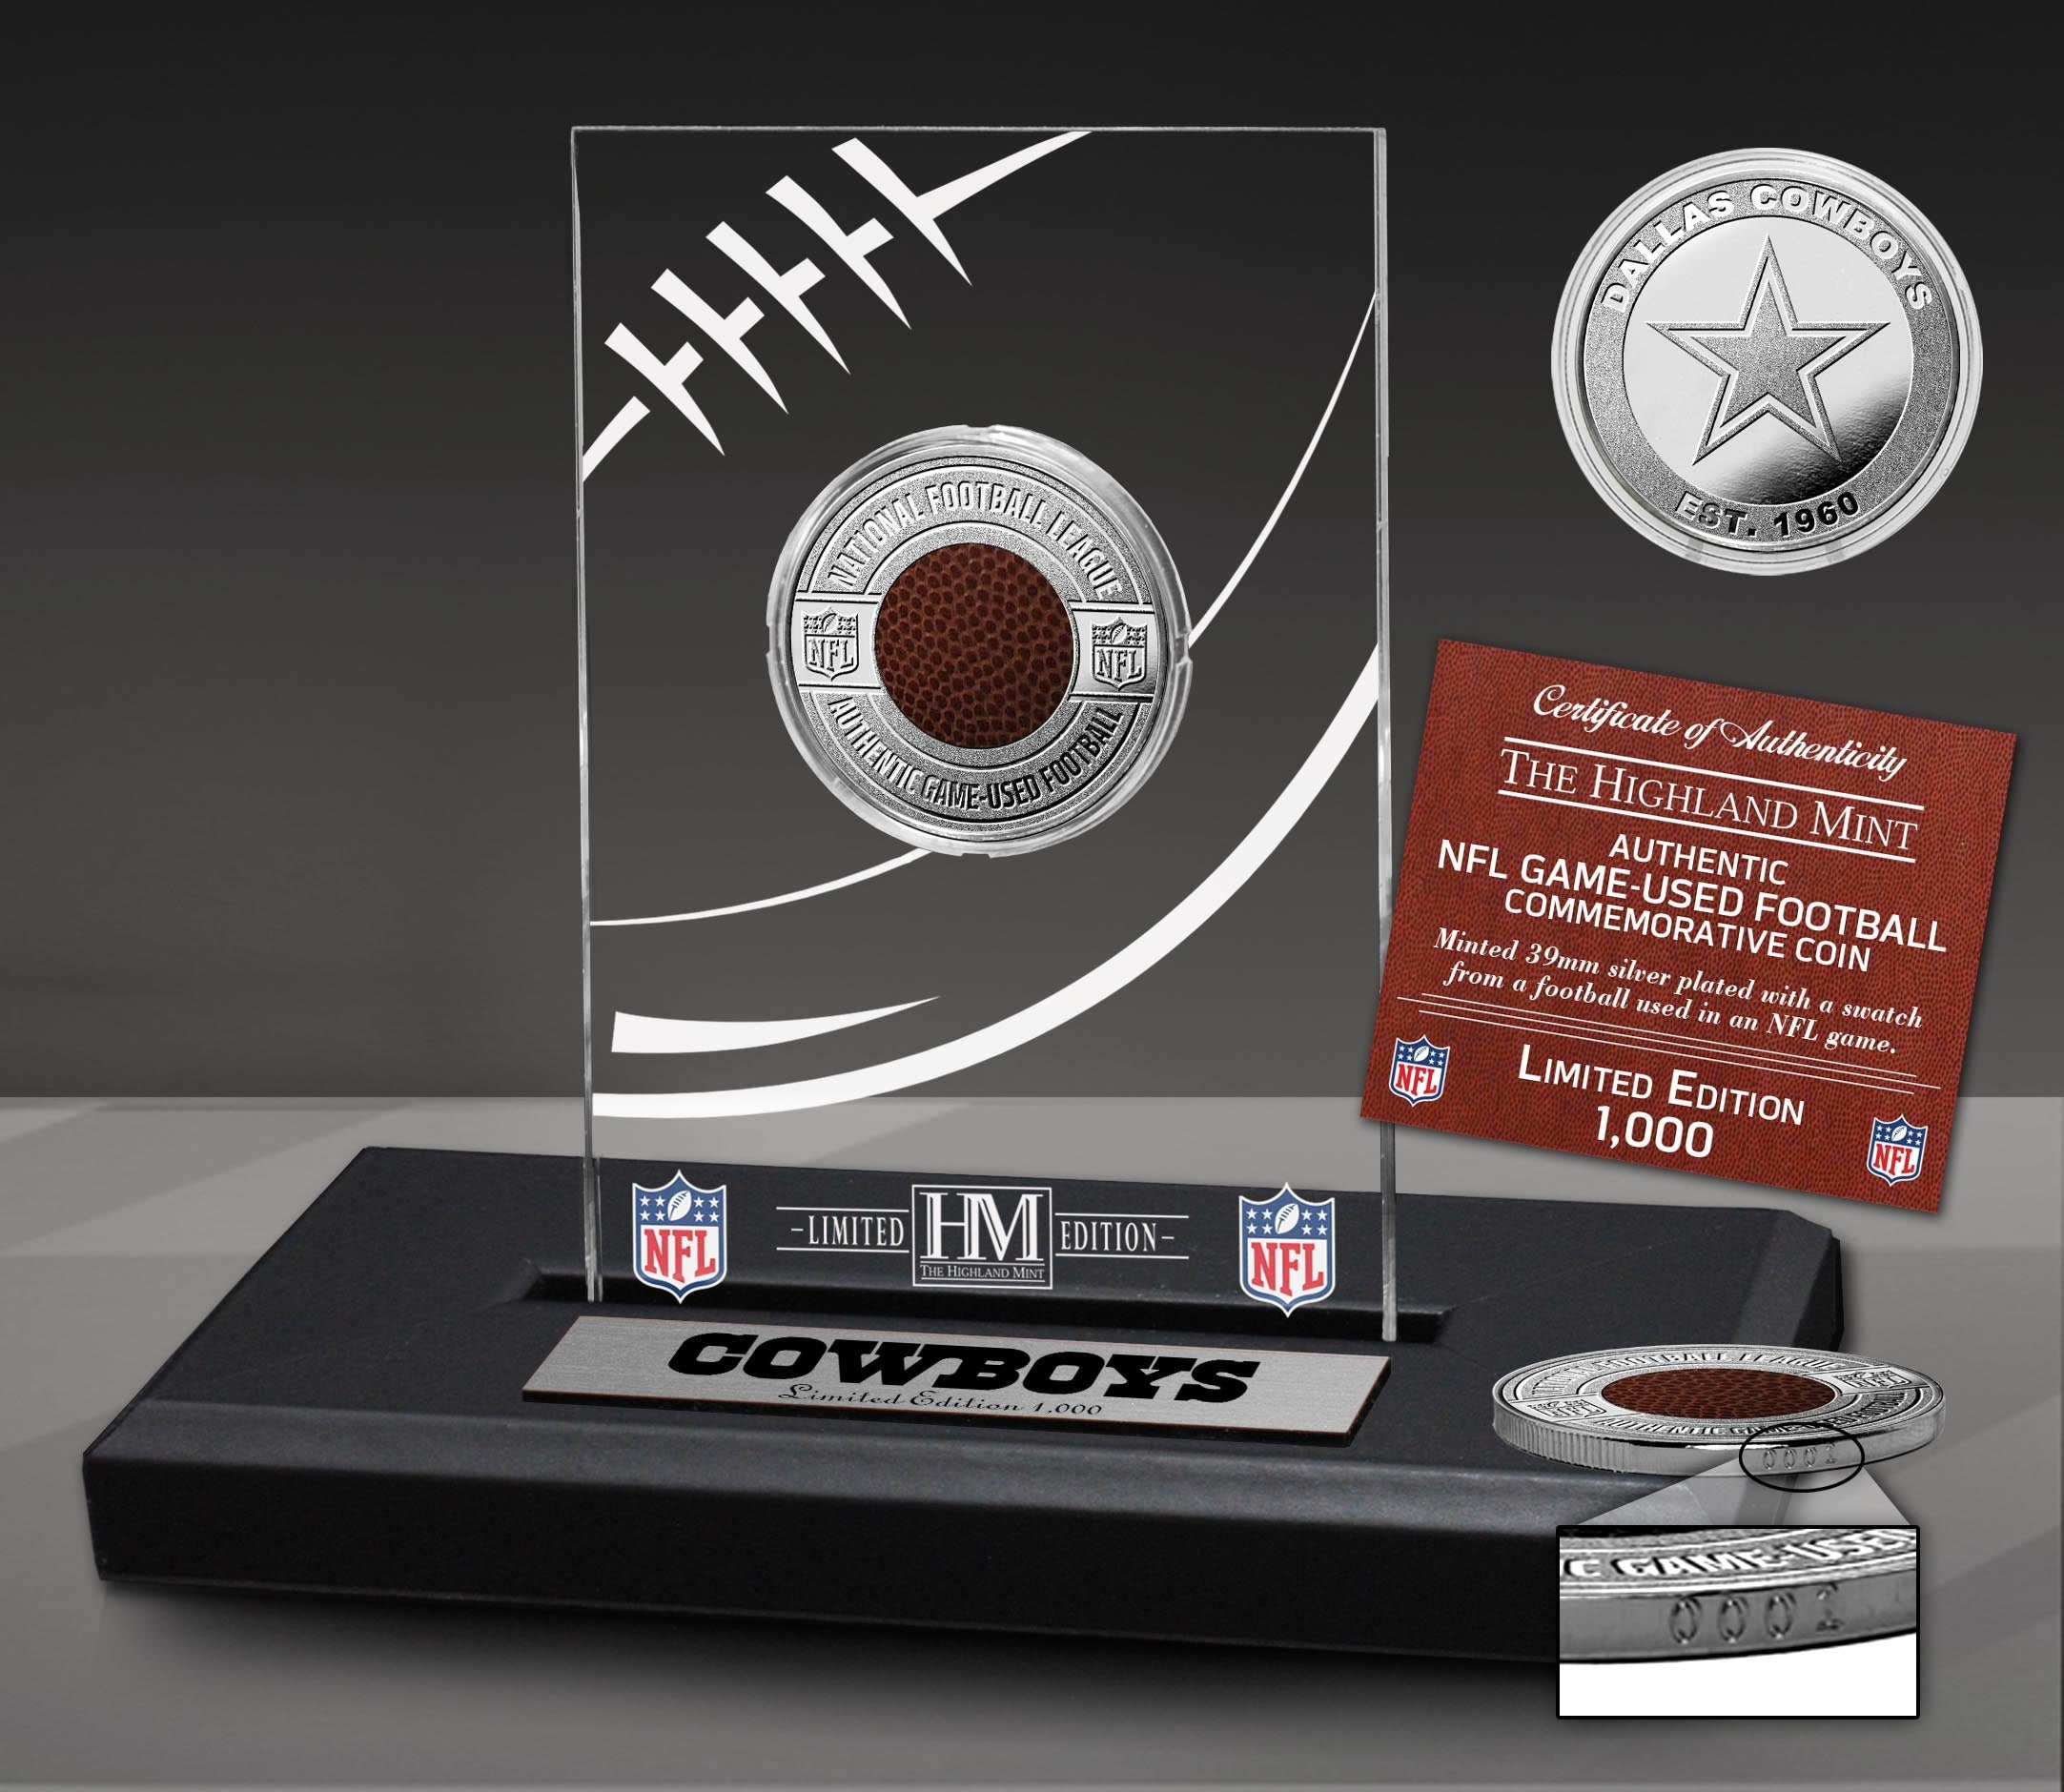 Dallas Cowboys Game Used NFL Football Silver Plated Coin in Commemorative Display